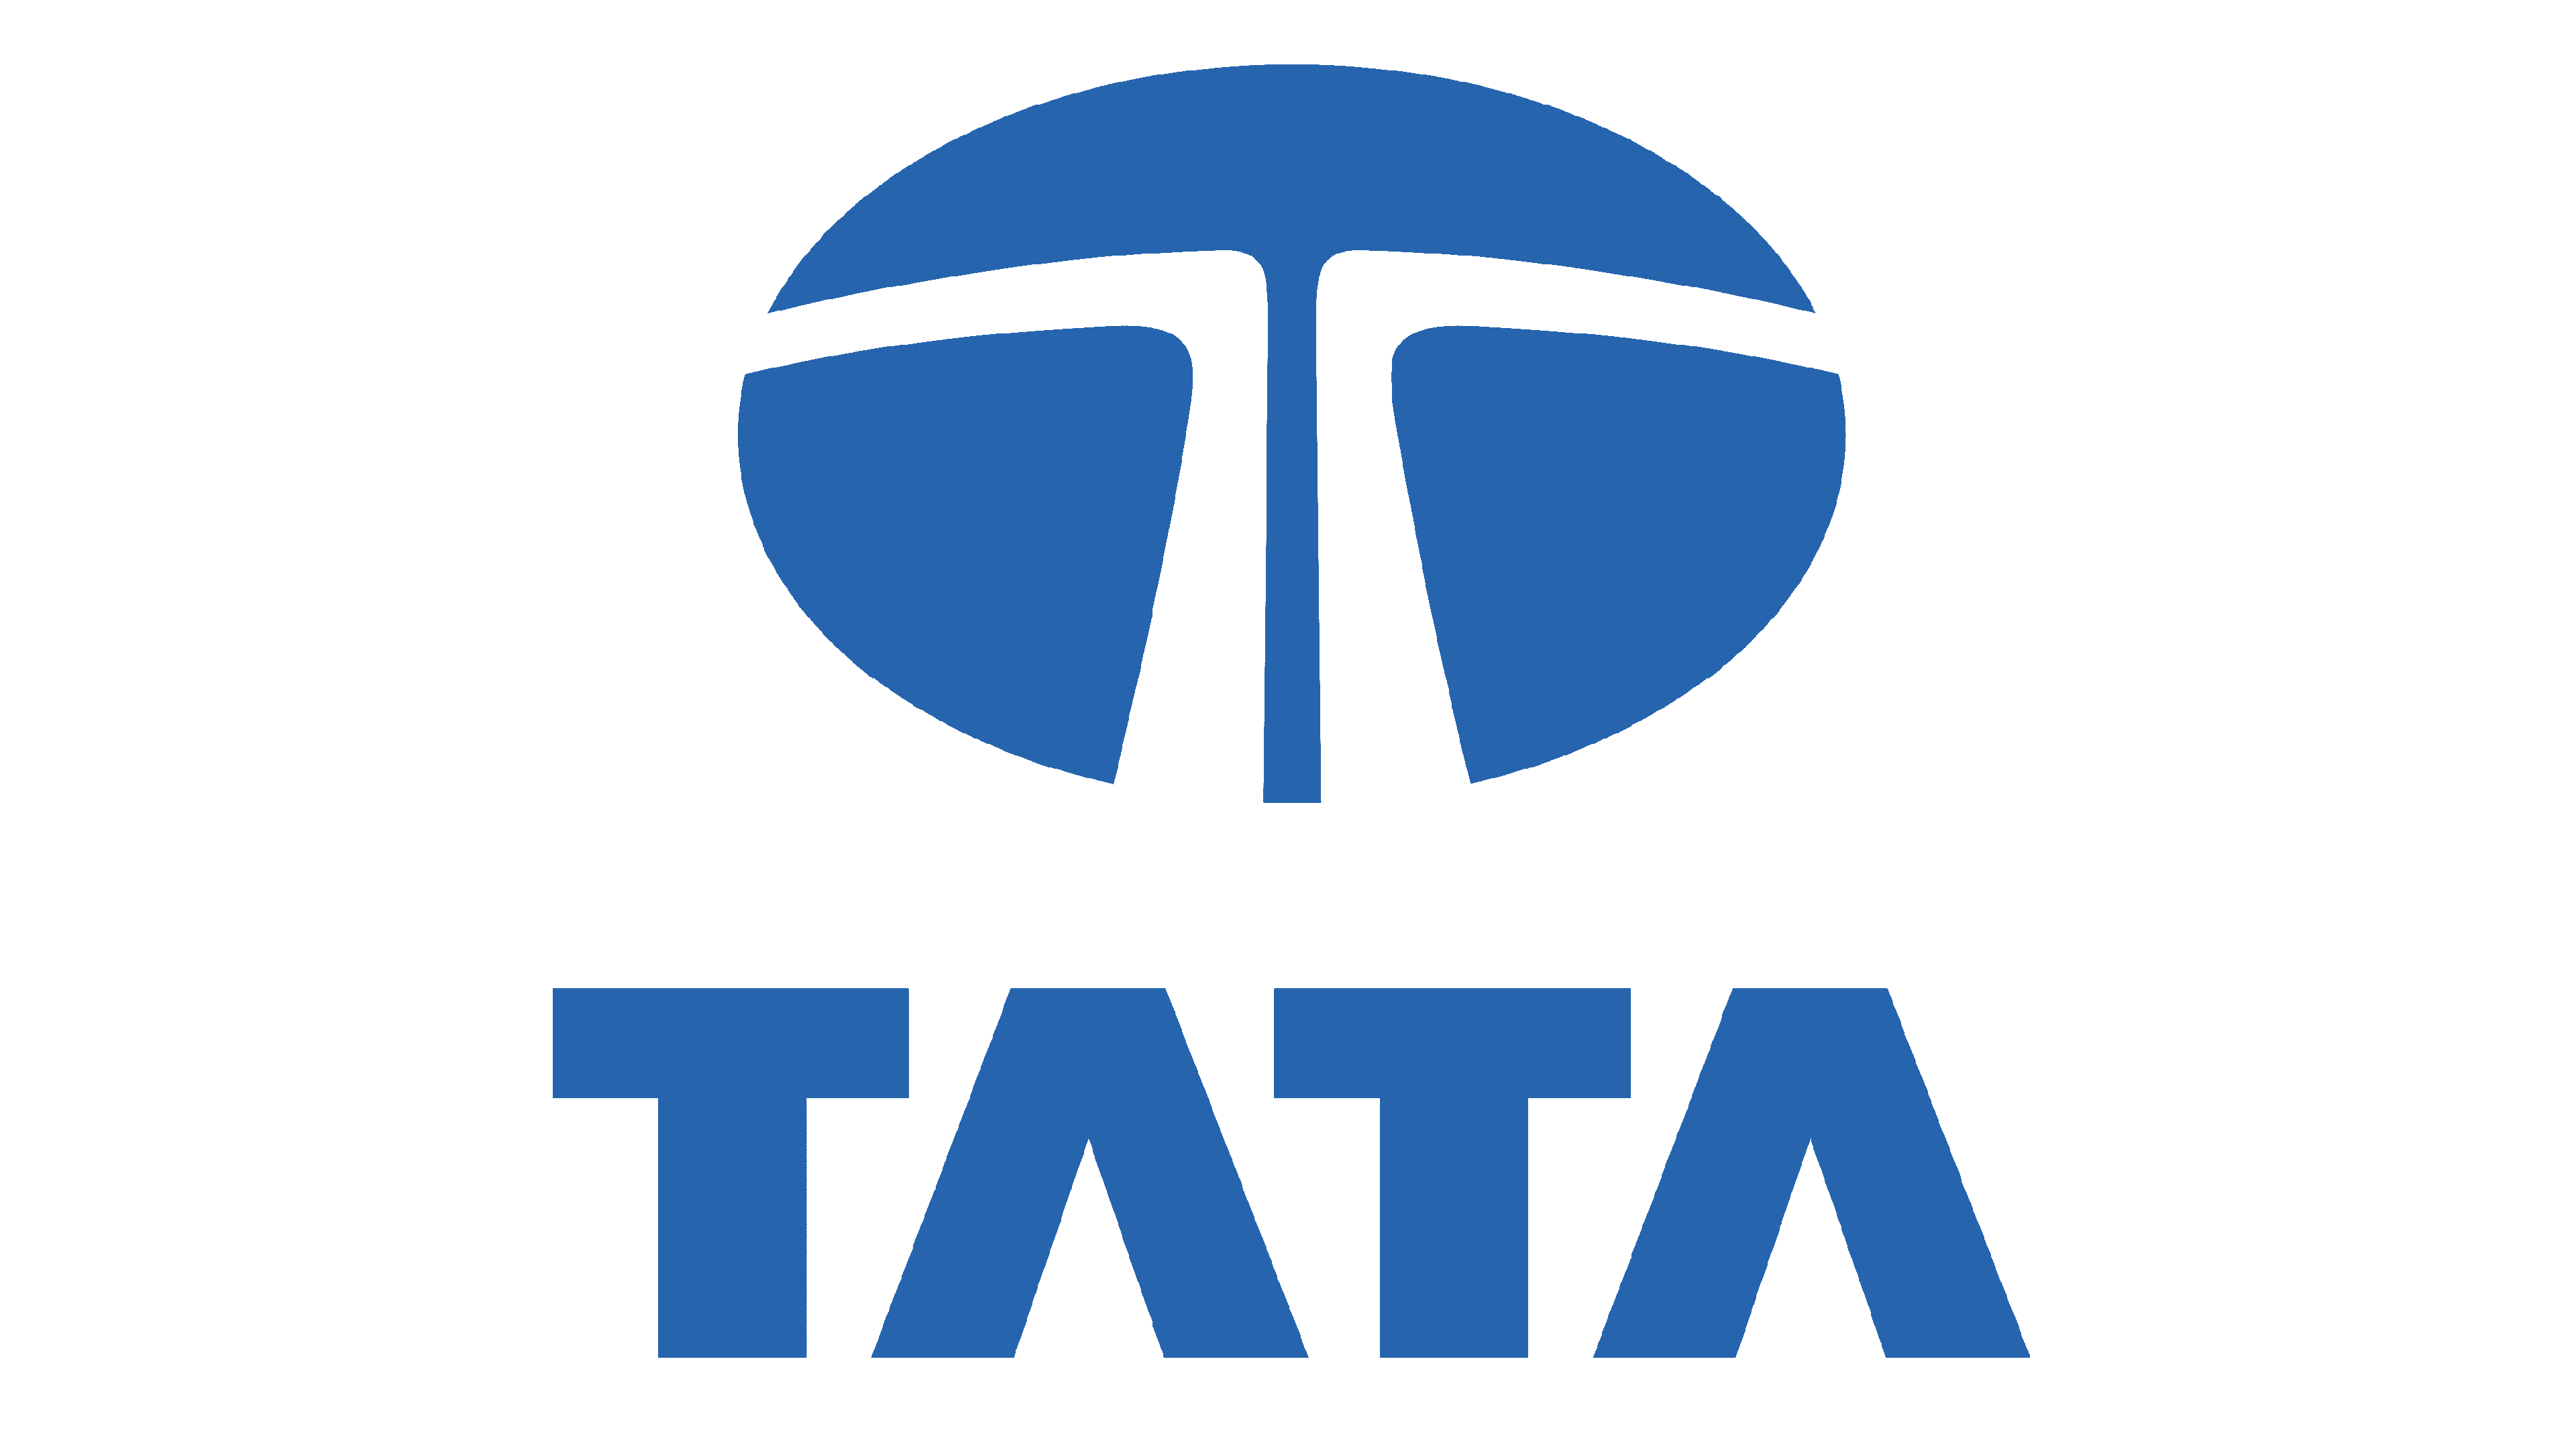 Tata Motors Service Connect on the App Store